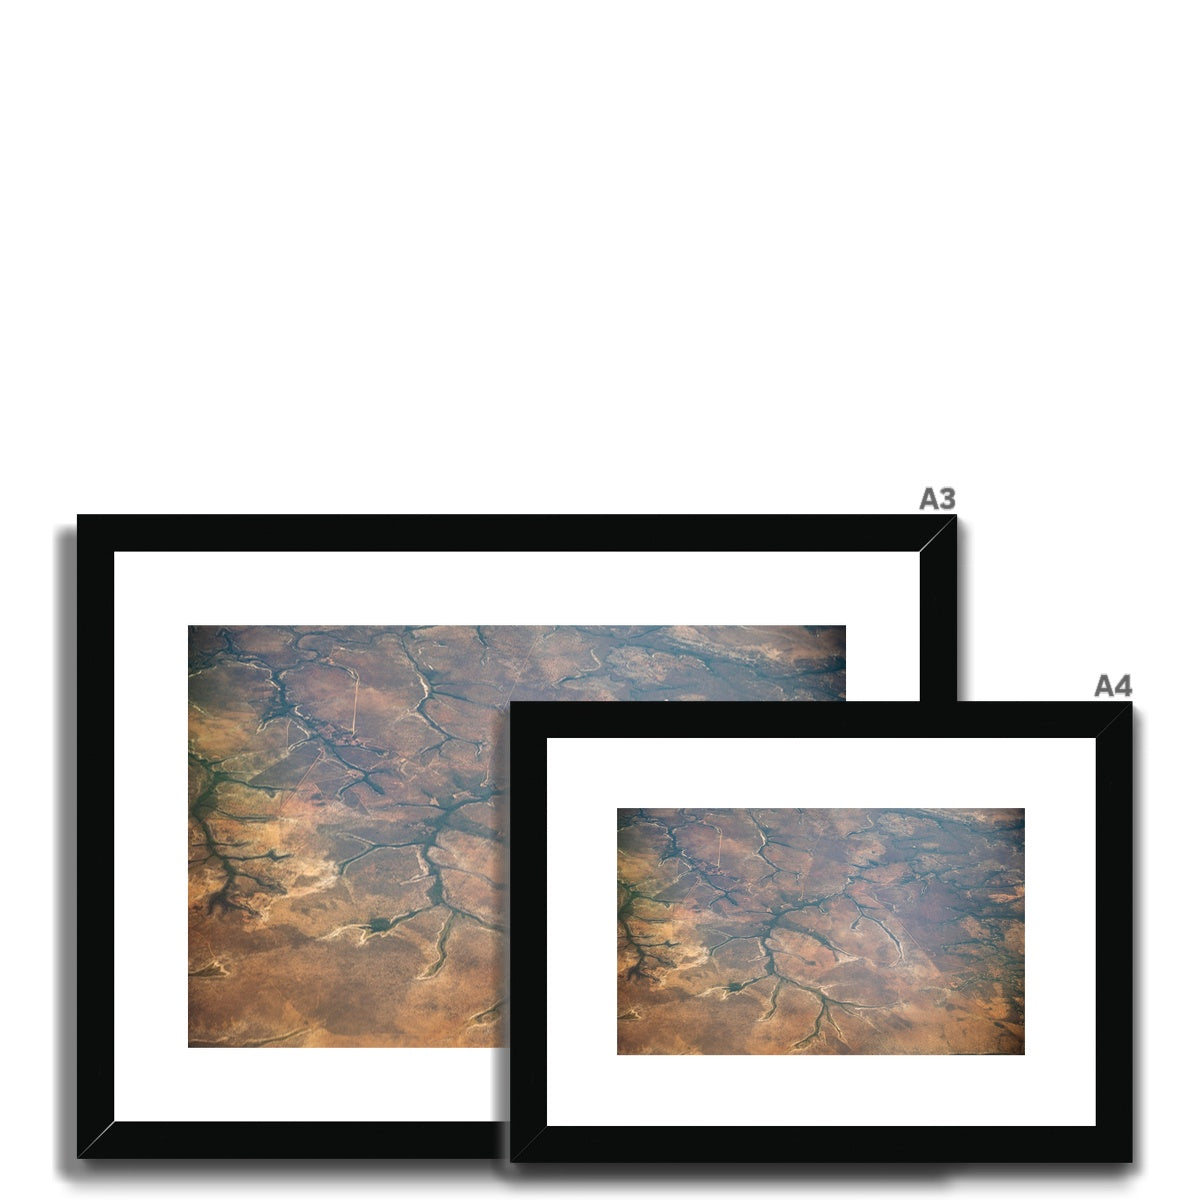 Amazonas after the fires Framed & Mounted Print